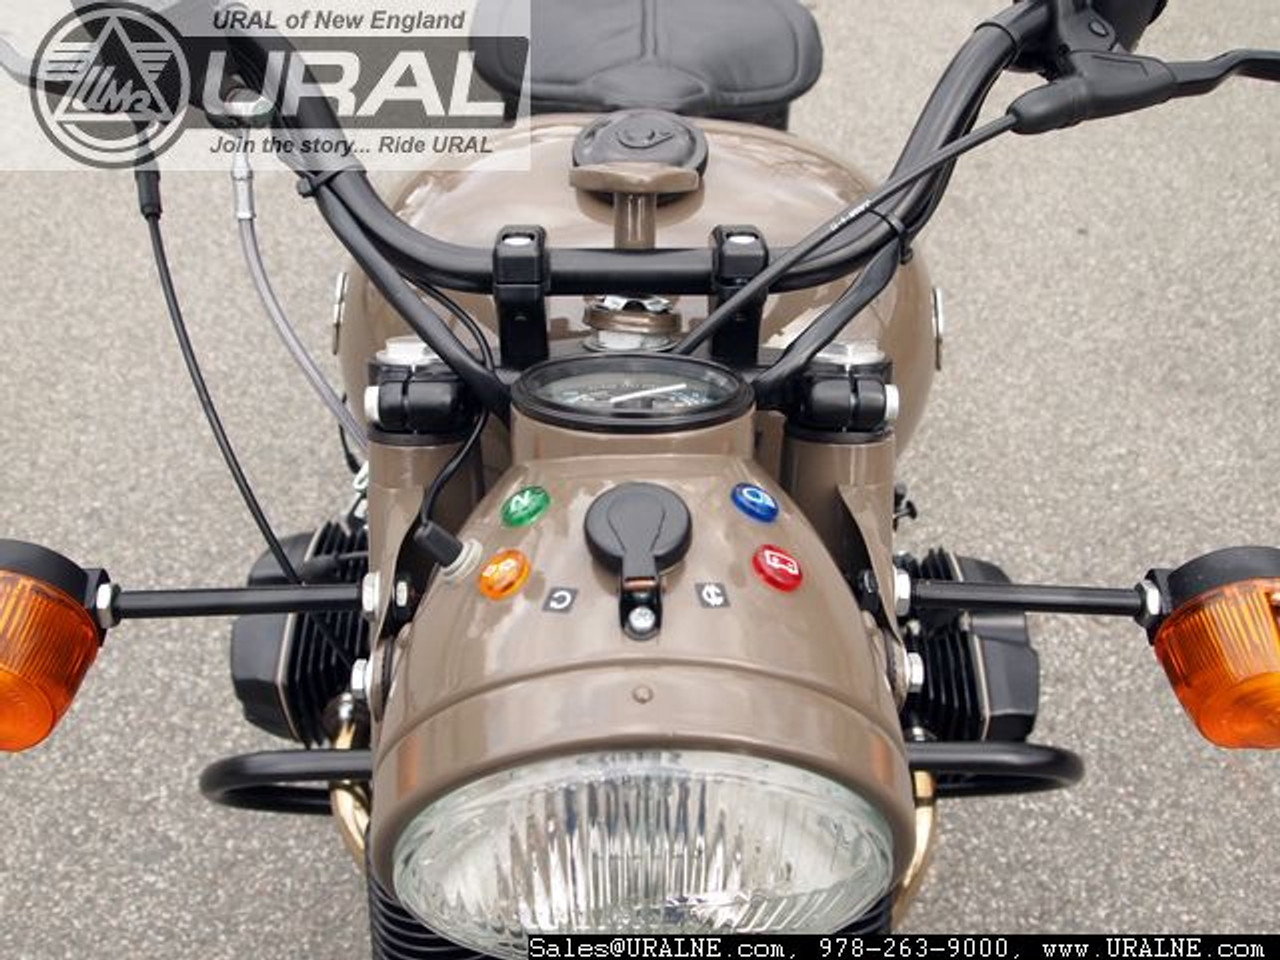 2012 Ural M70 Anniversary Edition Solo (Only 10 Made)